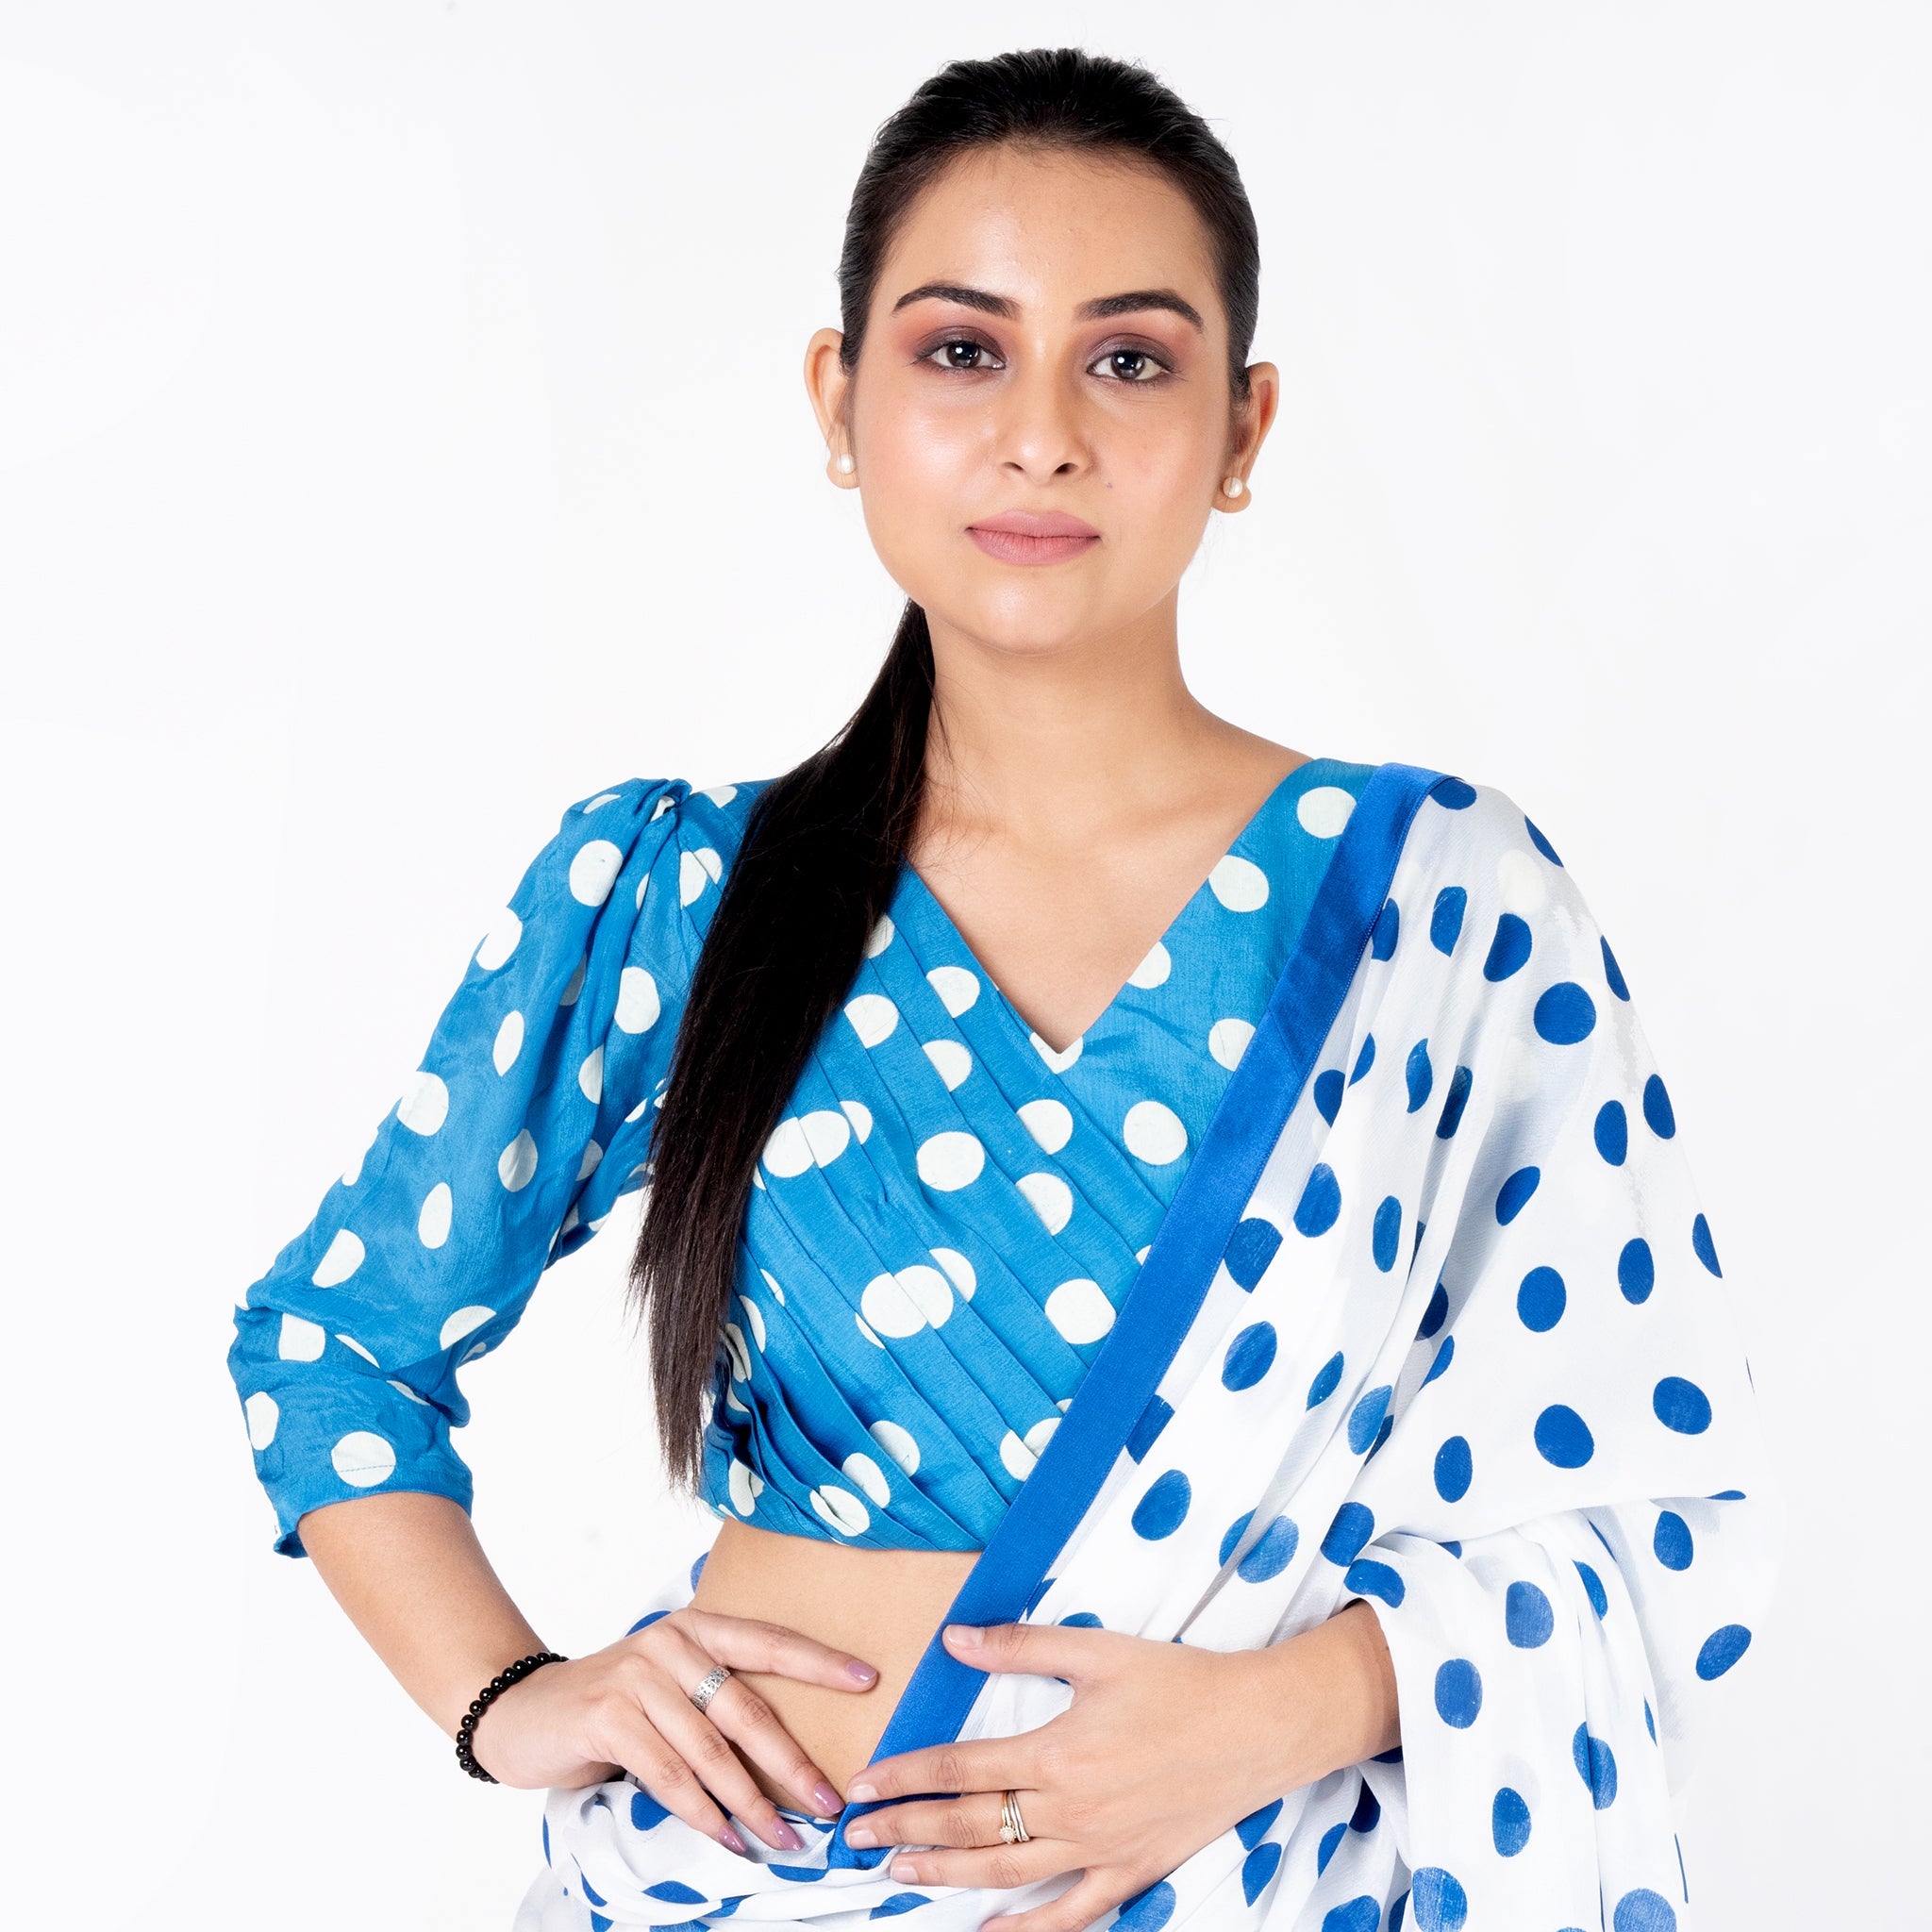 Women's Blue Polka Dotted Front Side Pleadted Padded Chiffon Blouse - Boveee